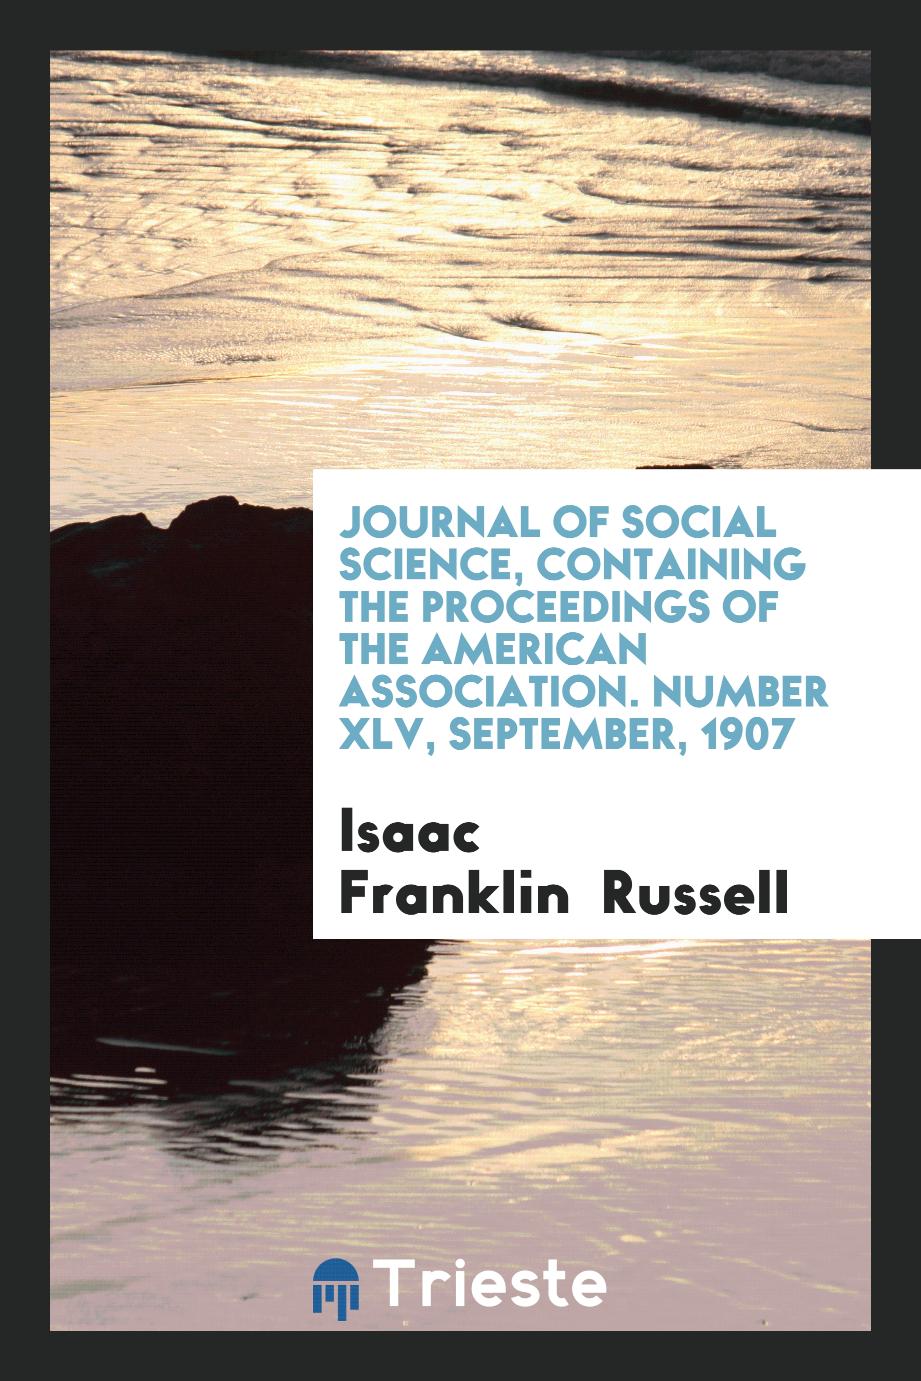 Journal of social science, containing the proceedings of the American Association. Number XLV, September, 1907